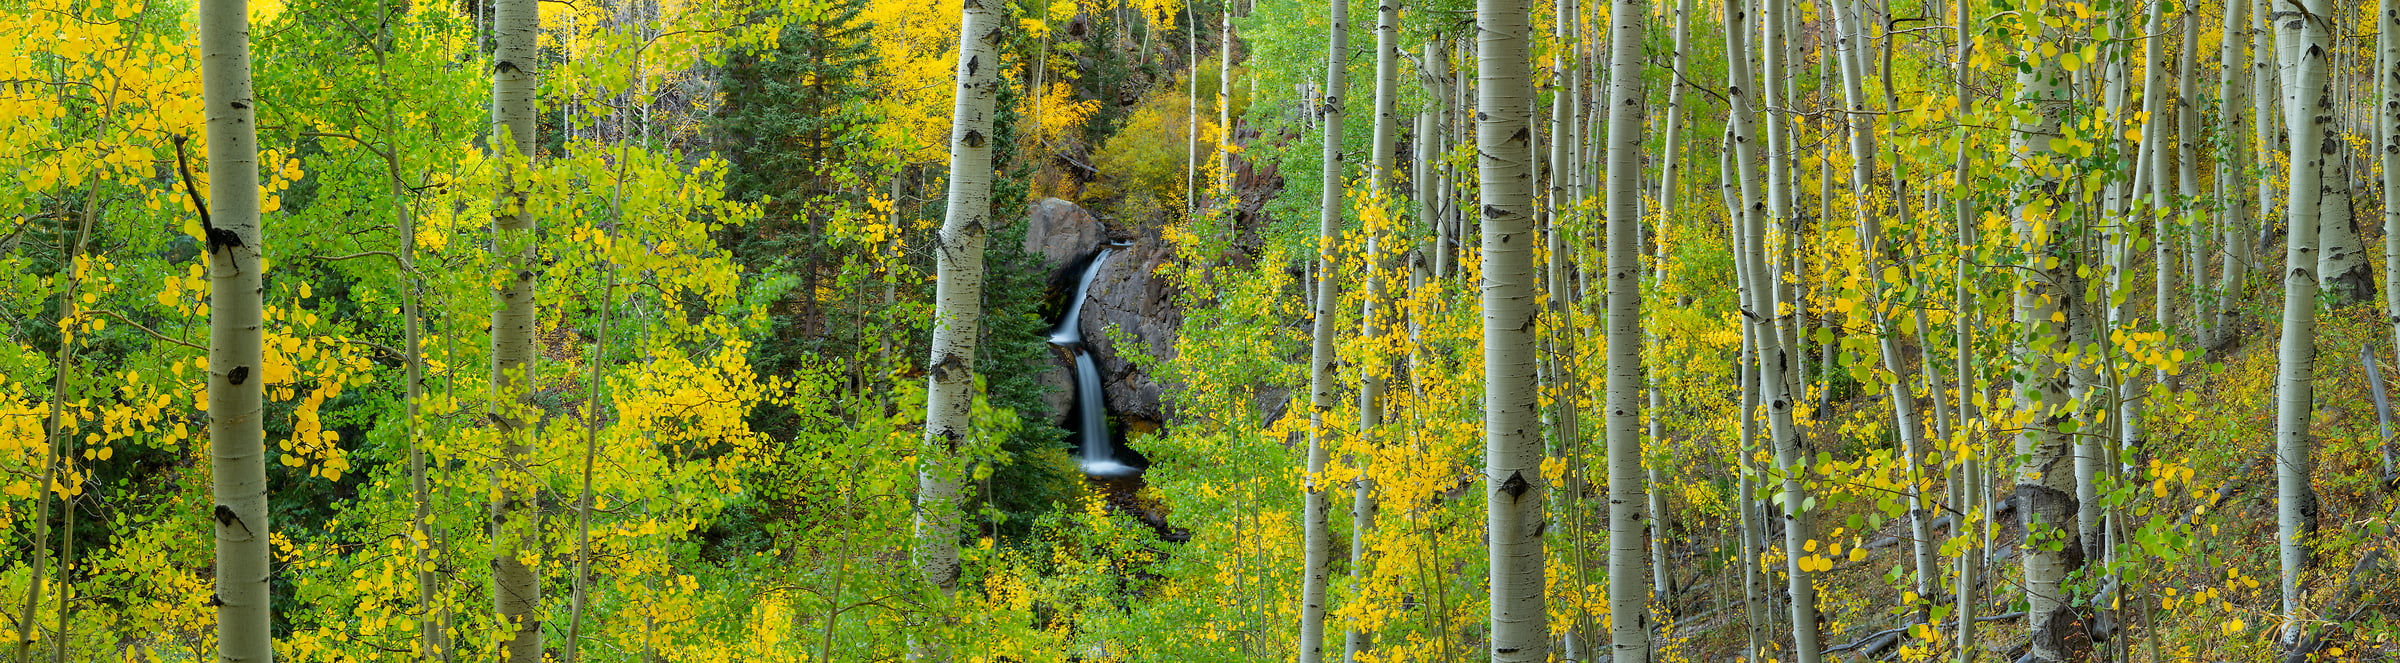 203 megapixels! A very high resolution, panoramic photo print of a nature scene with birch trees, a forest, and a waterfall; photograph created by Phillip Noll in Lake City, Colorado